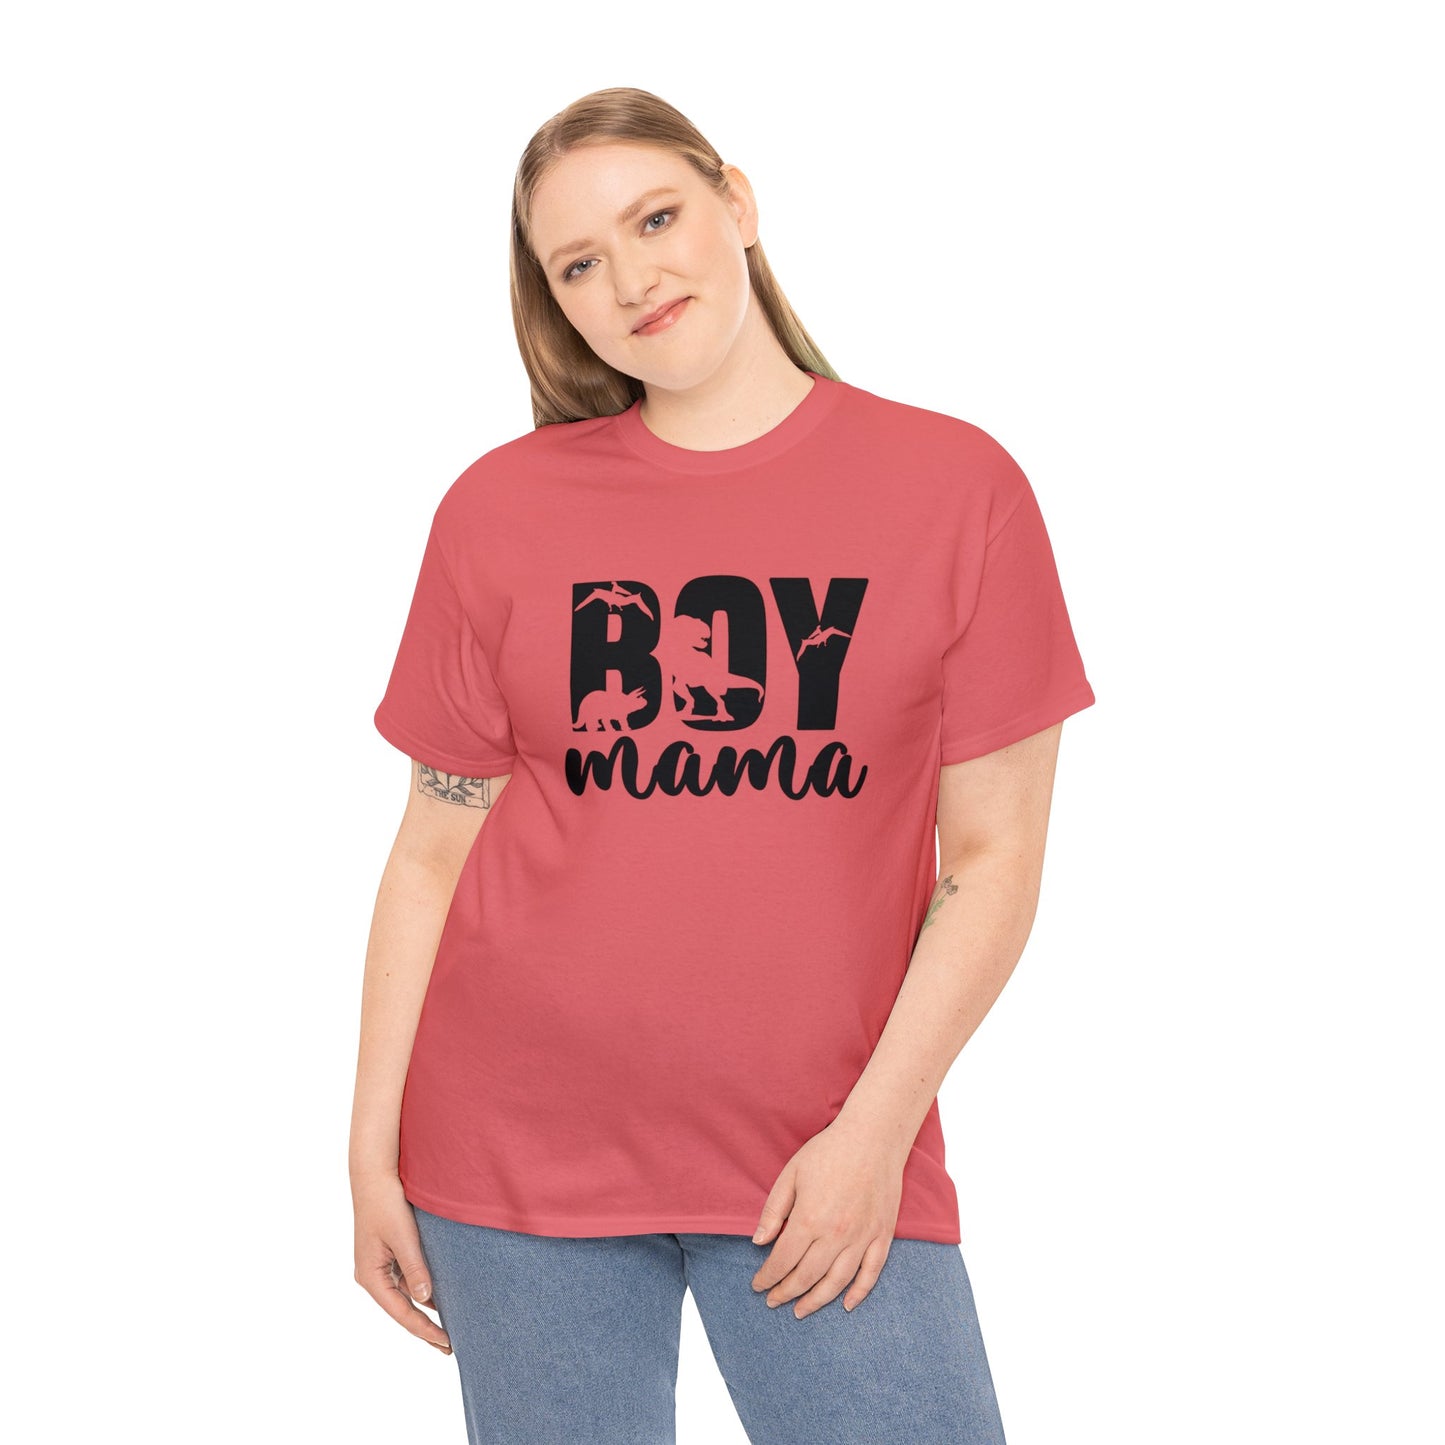 "Boy Mama" Women's T-Shirt - Weave Got Gifts - Unique Gifts You Won’t Find Anywhere Else!